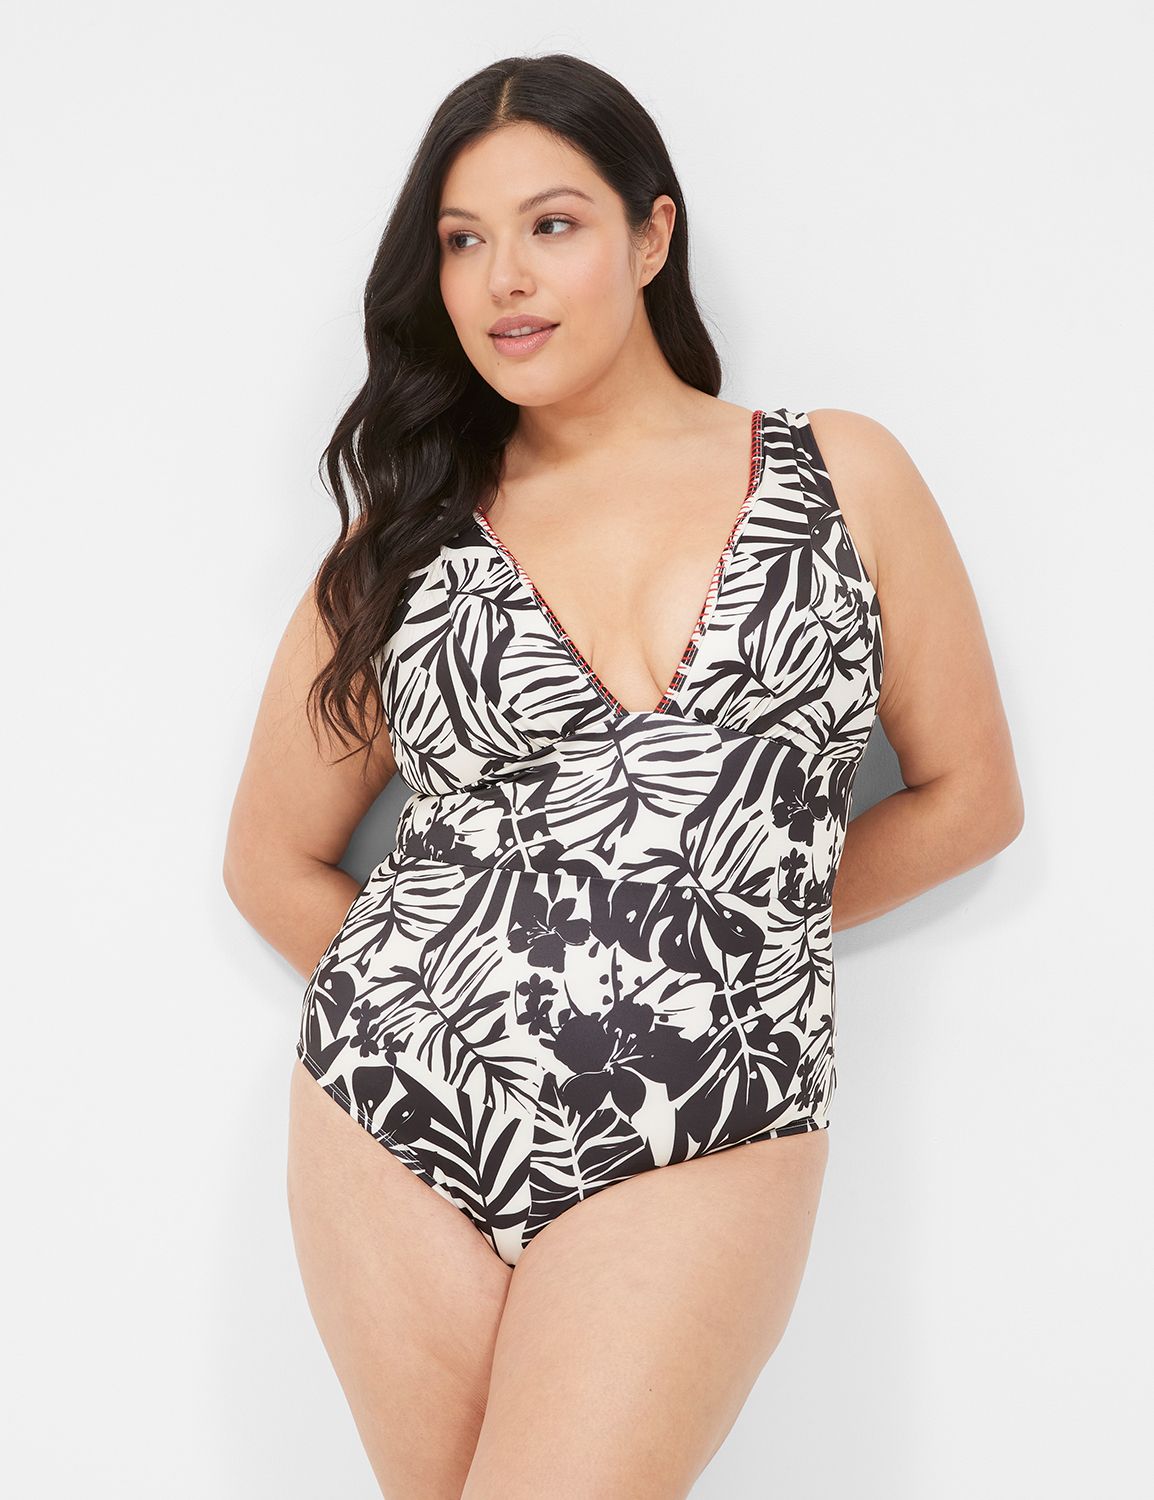 Cacique Paisley one piece swim suit with built-in bra